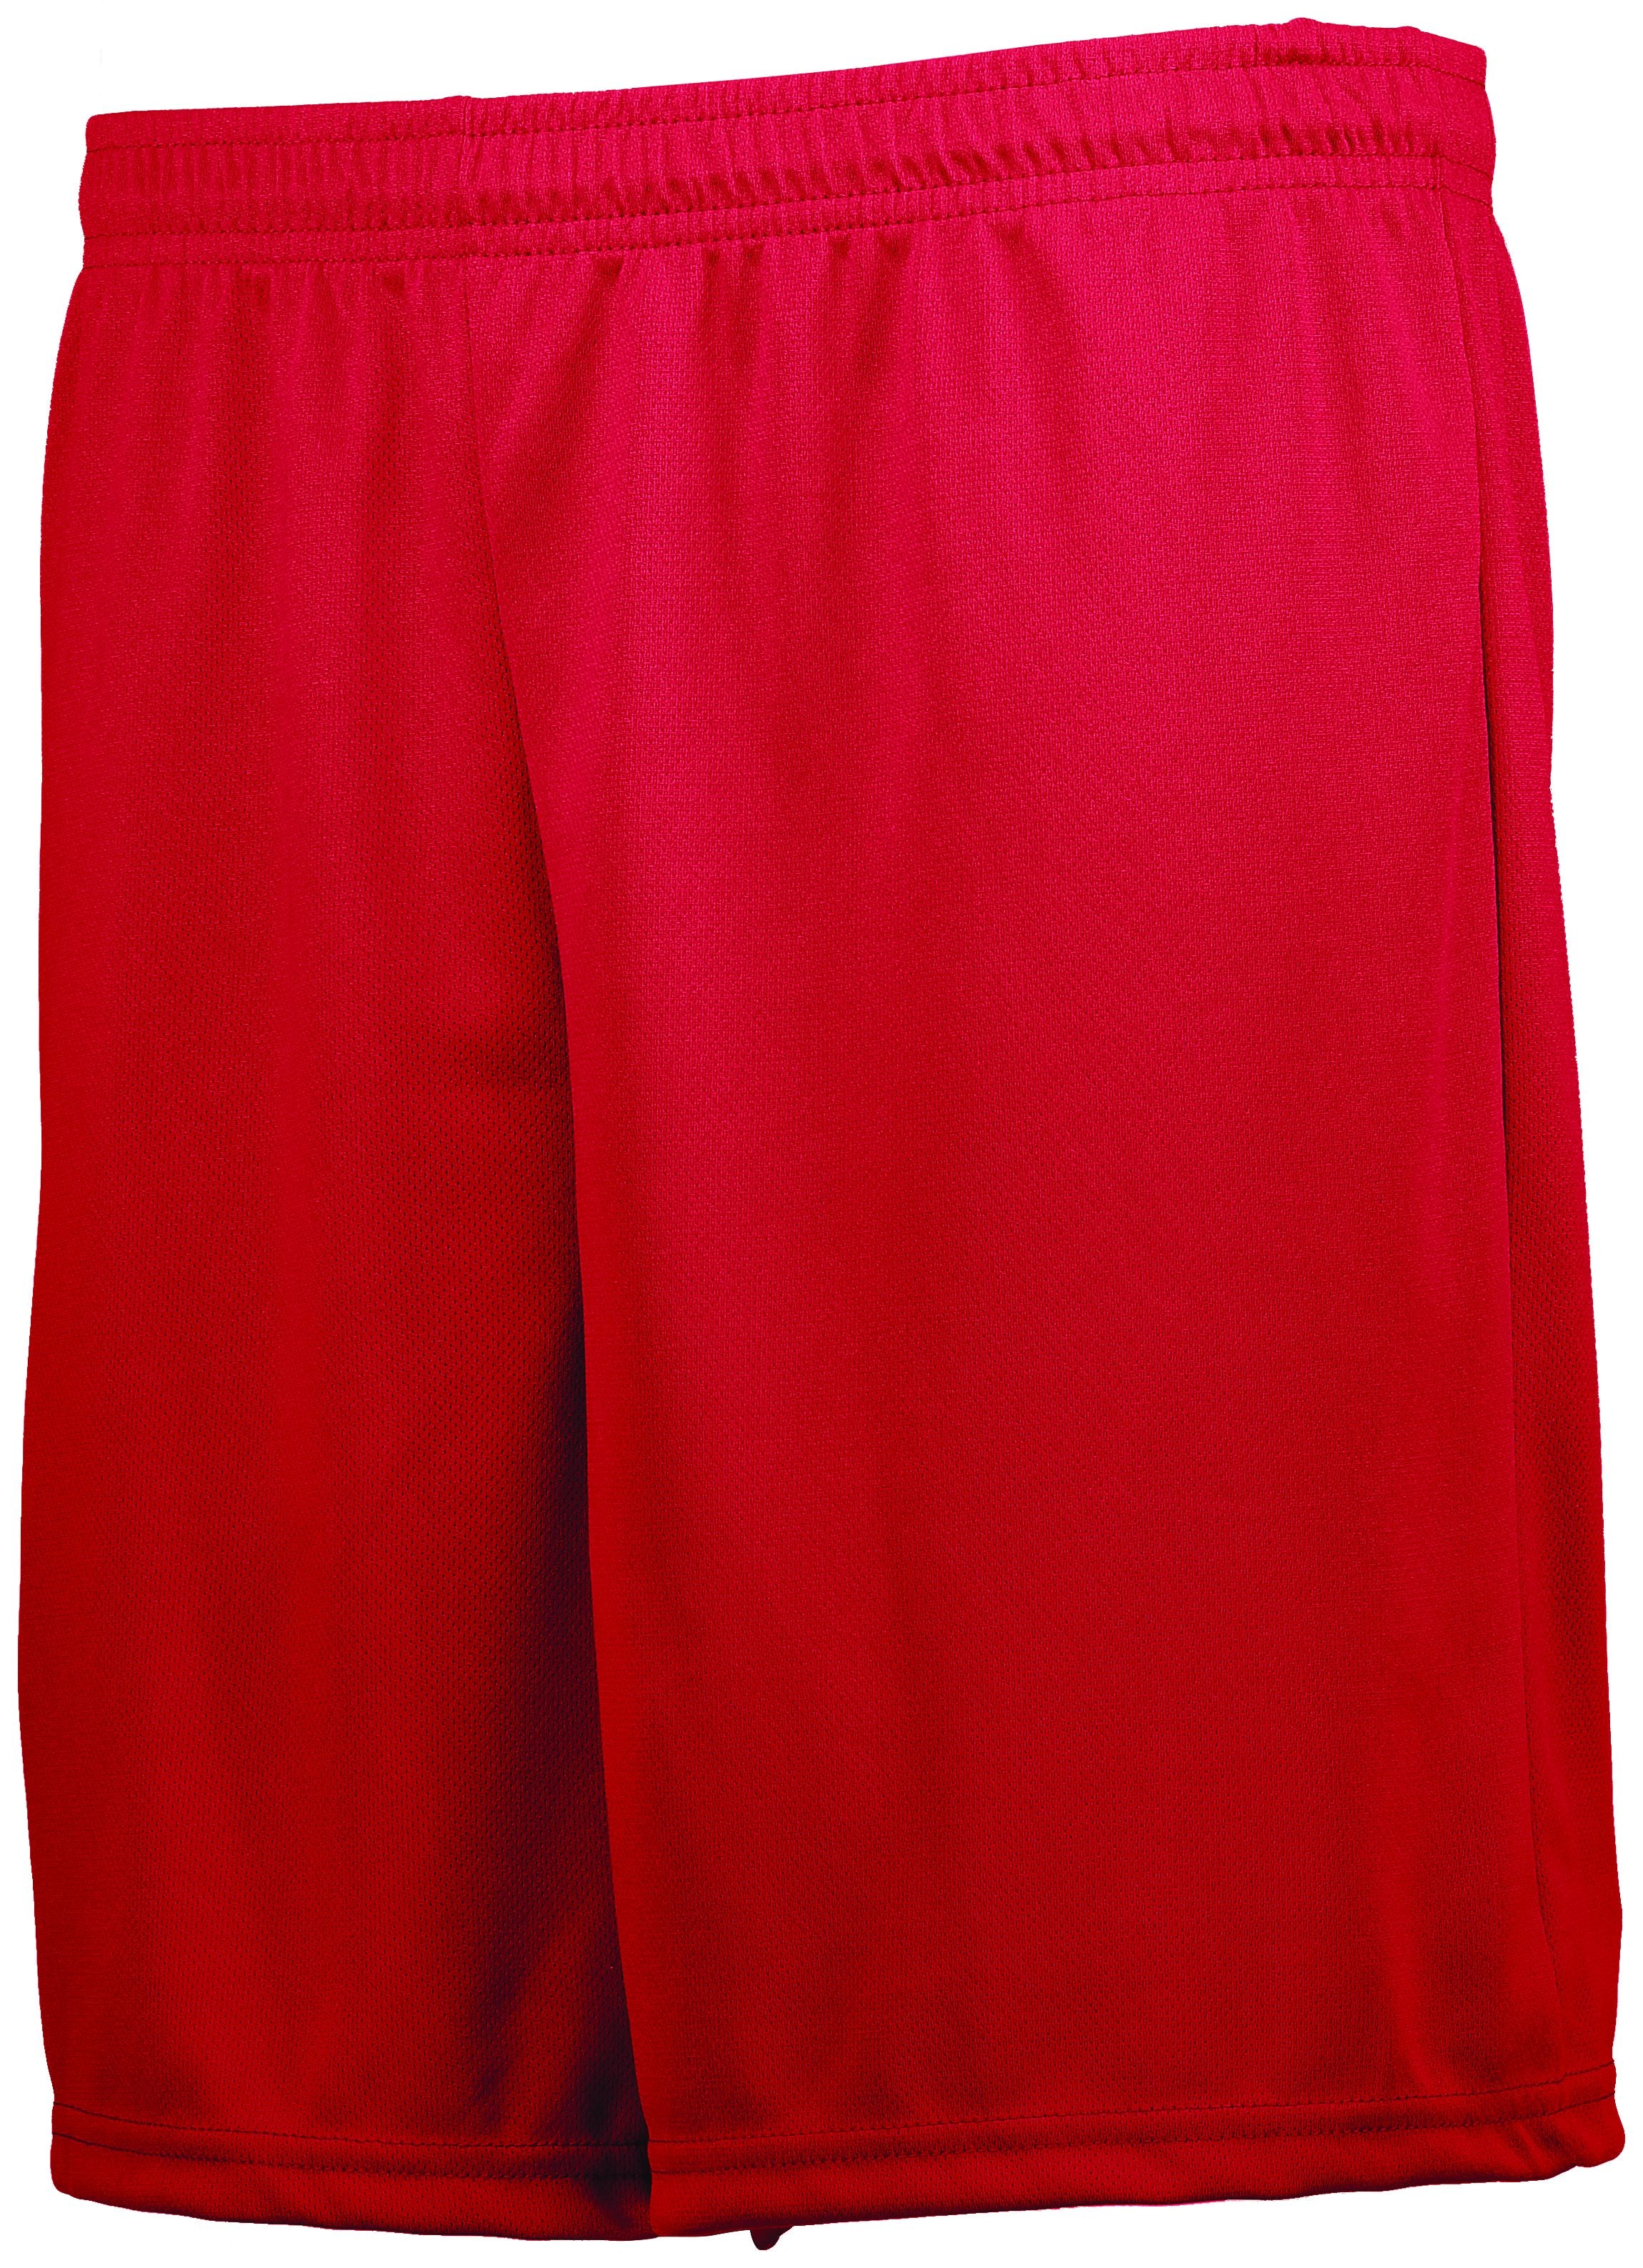 High 5 Youth Prevail Shorts in Scarlet  -Part of the Youth, Youth-Shorts, High5-Products, Soccer, All-Sports-1 product lines at KanaleyCreations.com